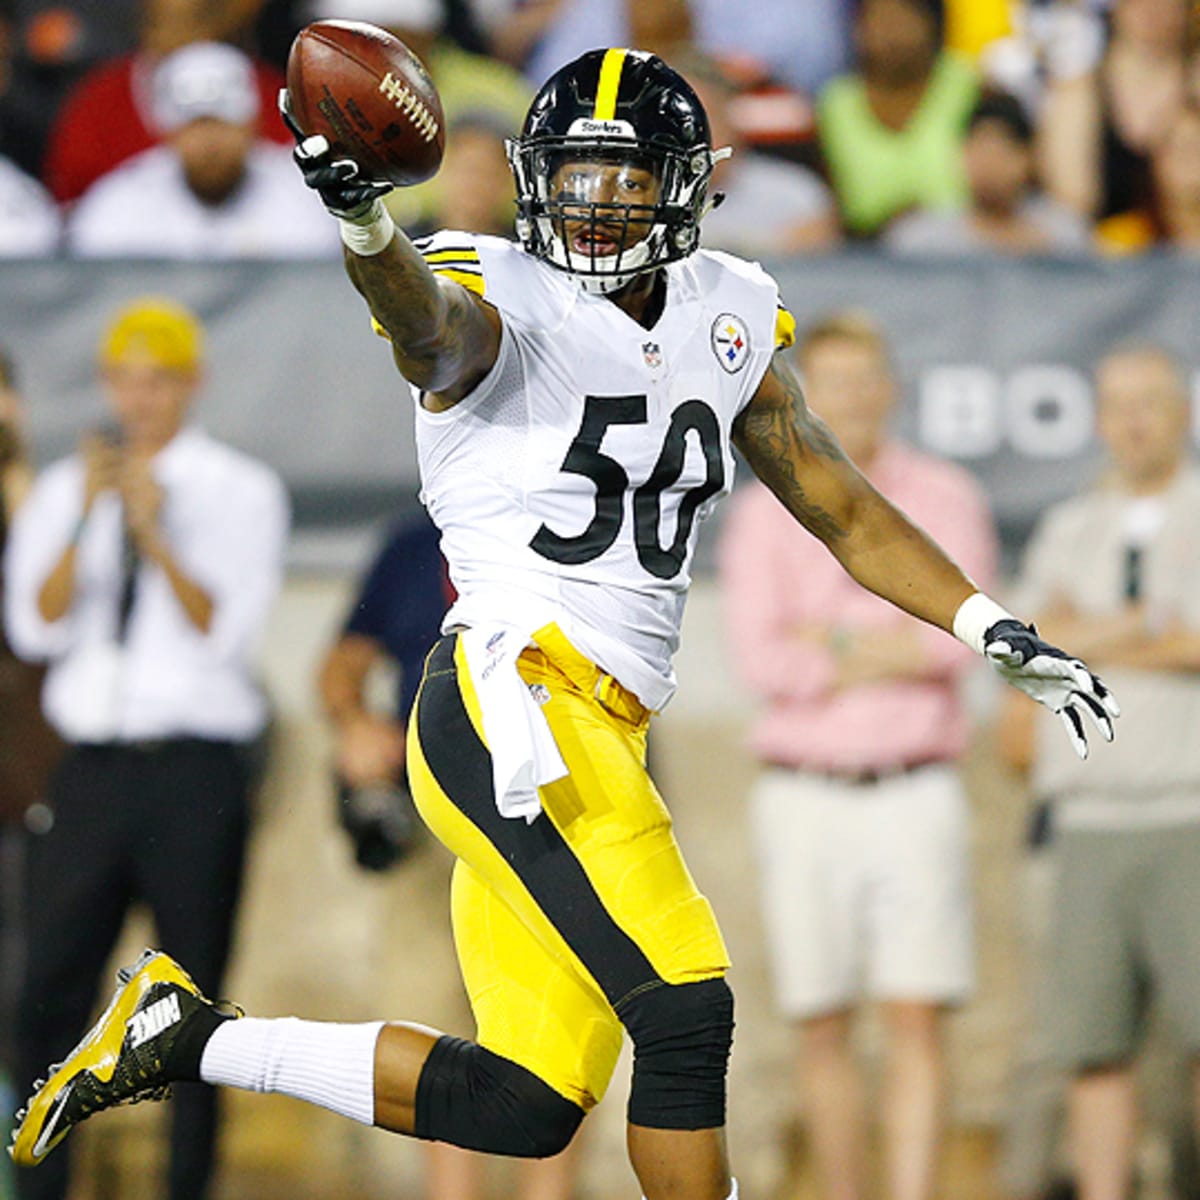 A new journey for Shazier